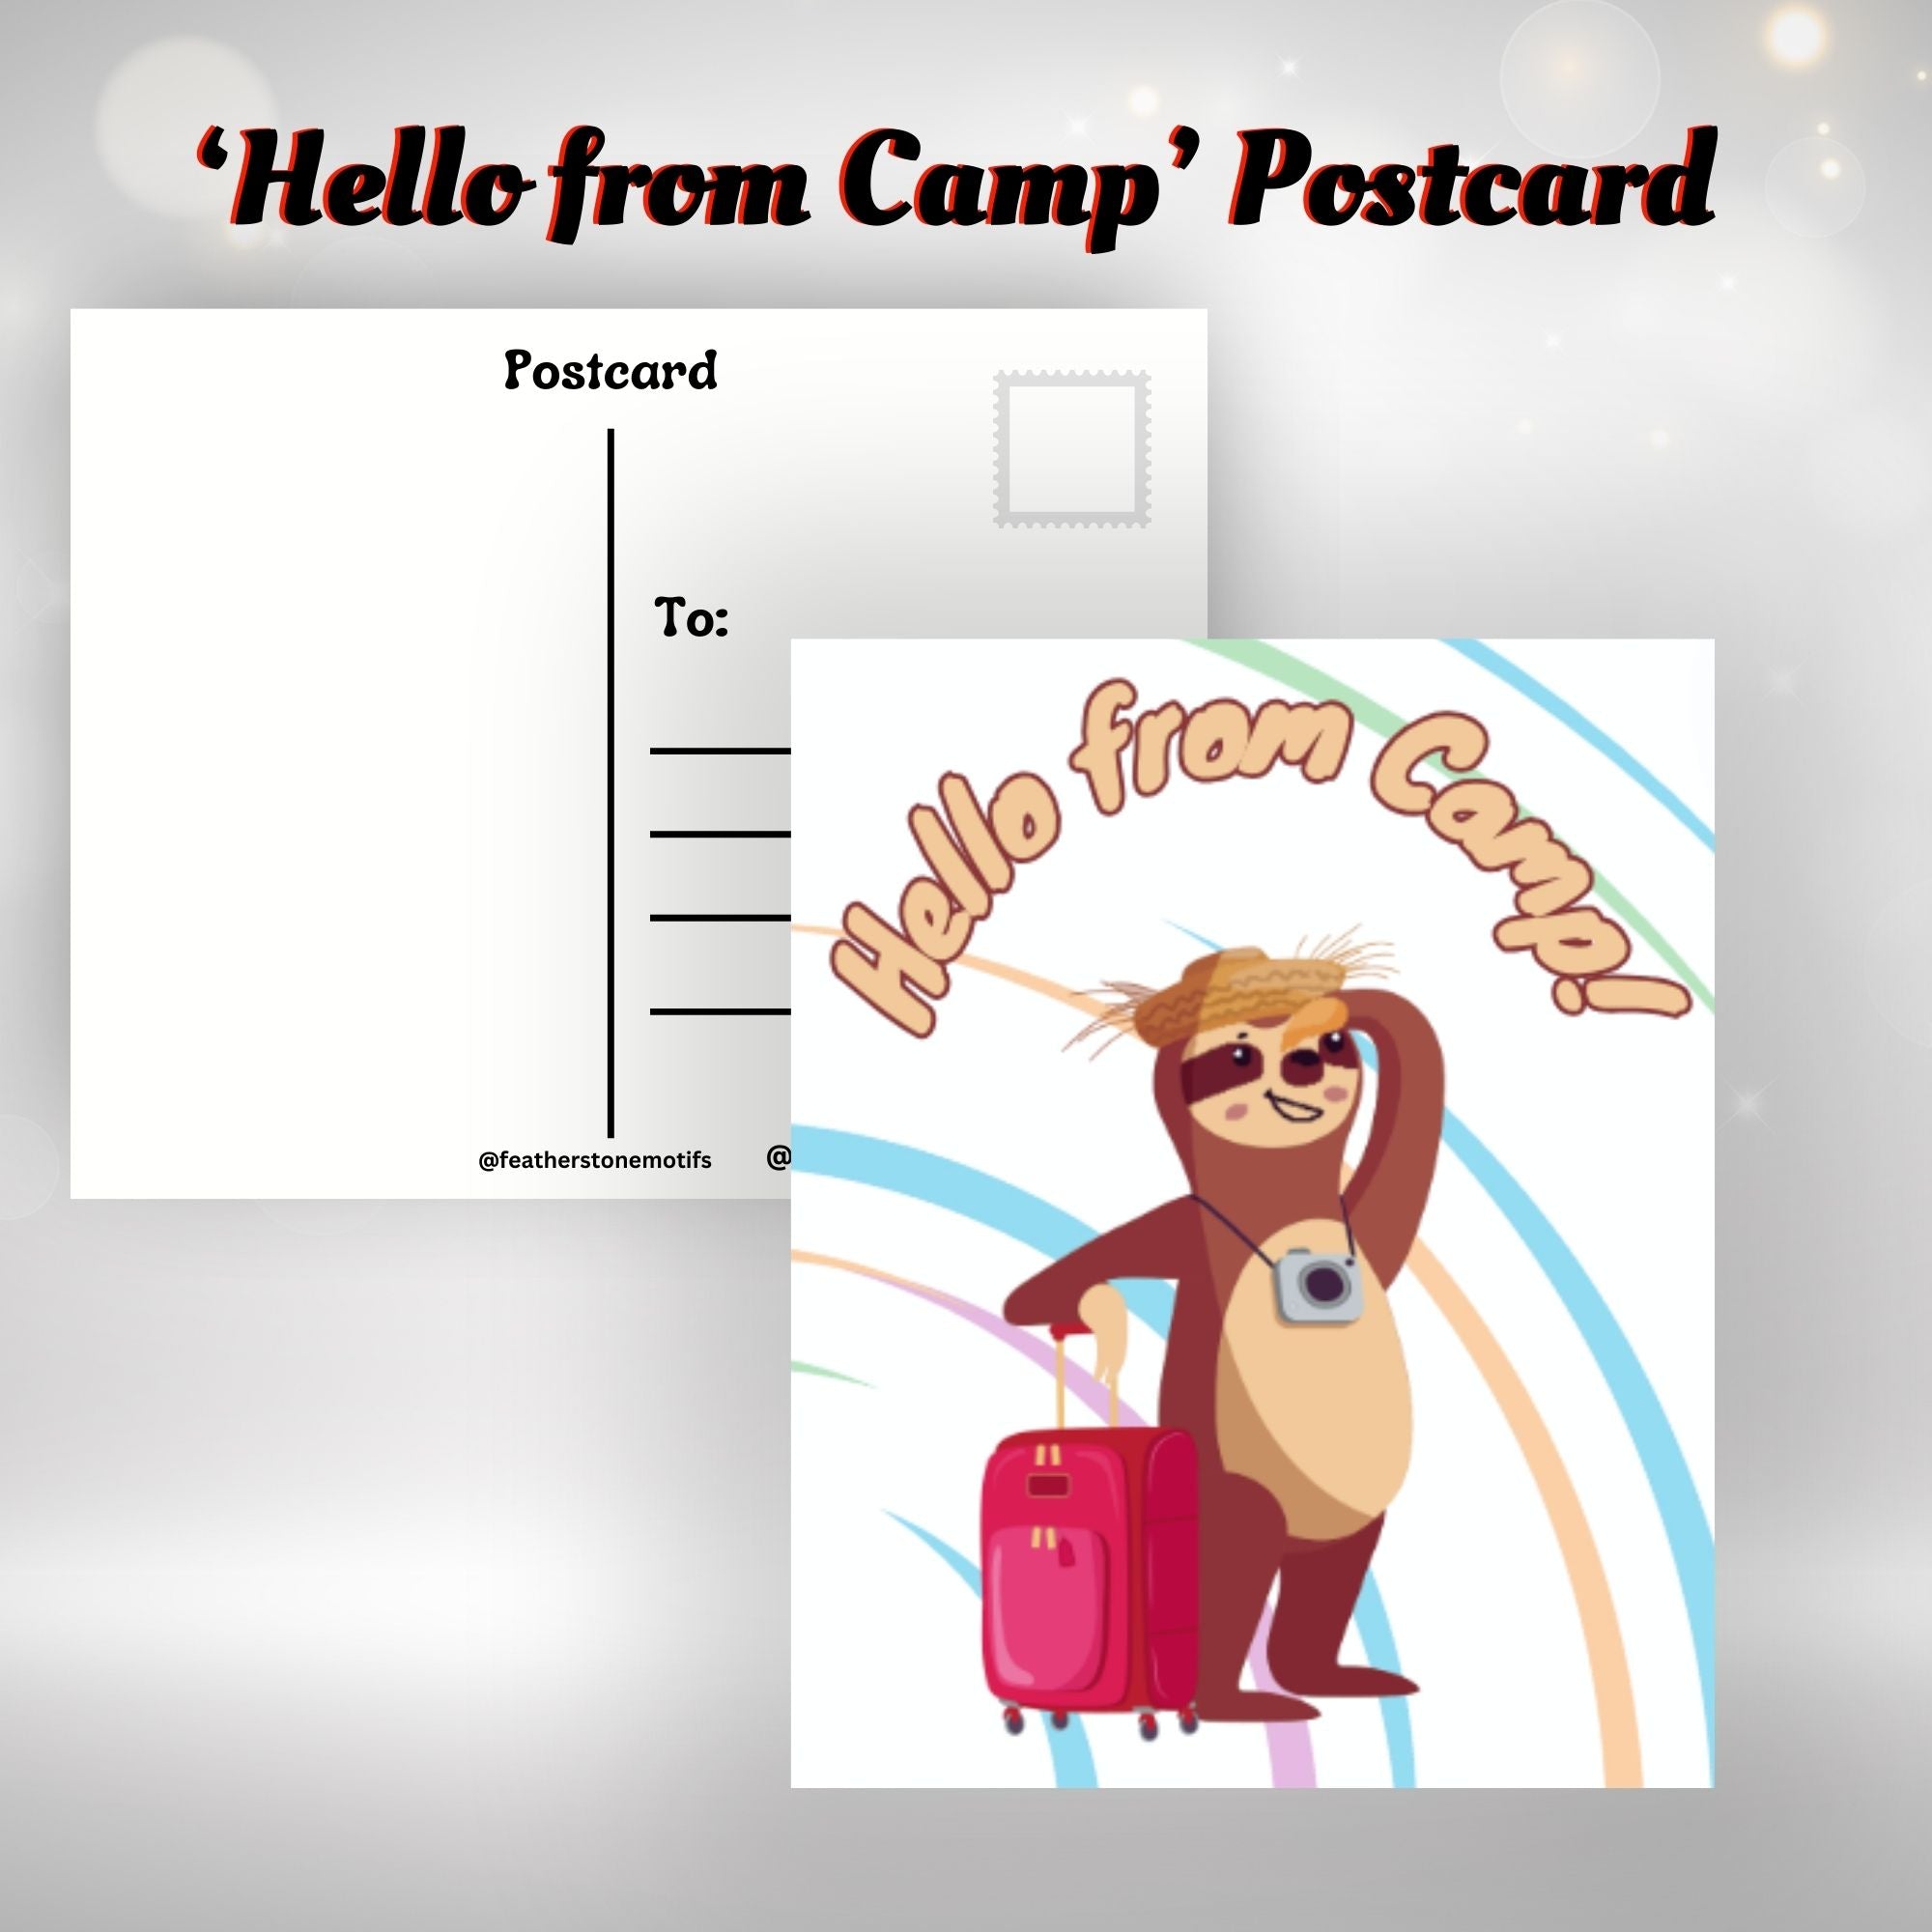 This image shows the Hello from Camp! postcard with a sloth wearing a camera and holding a suitcase.